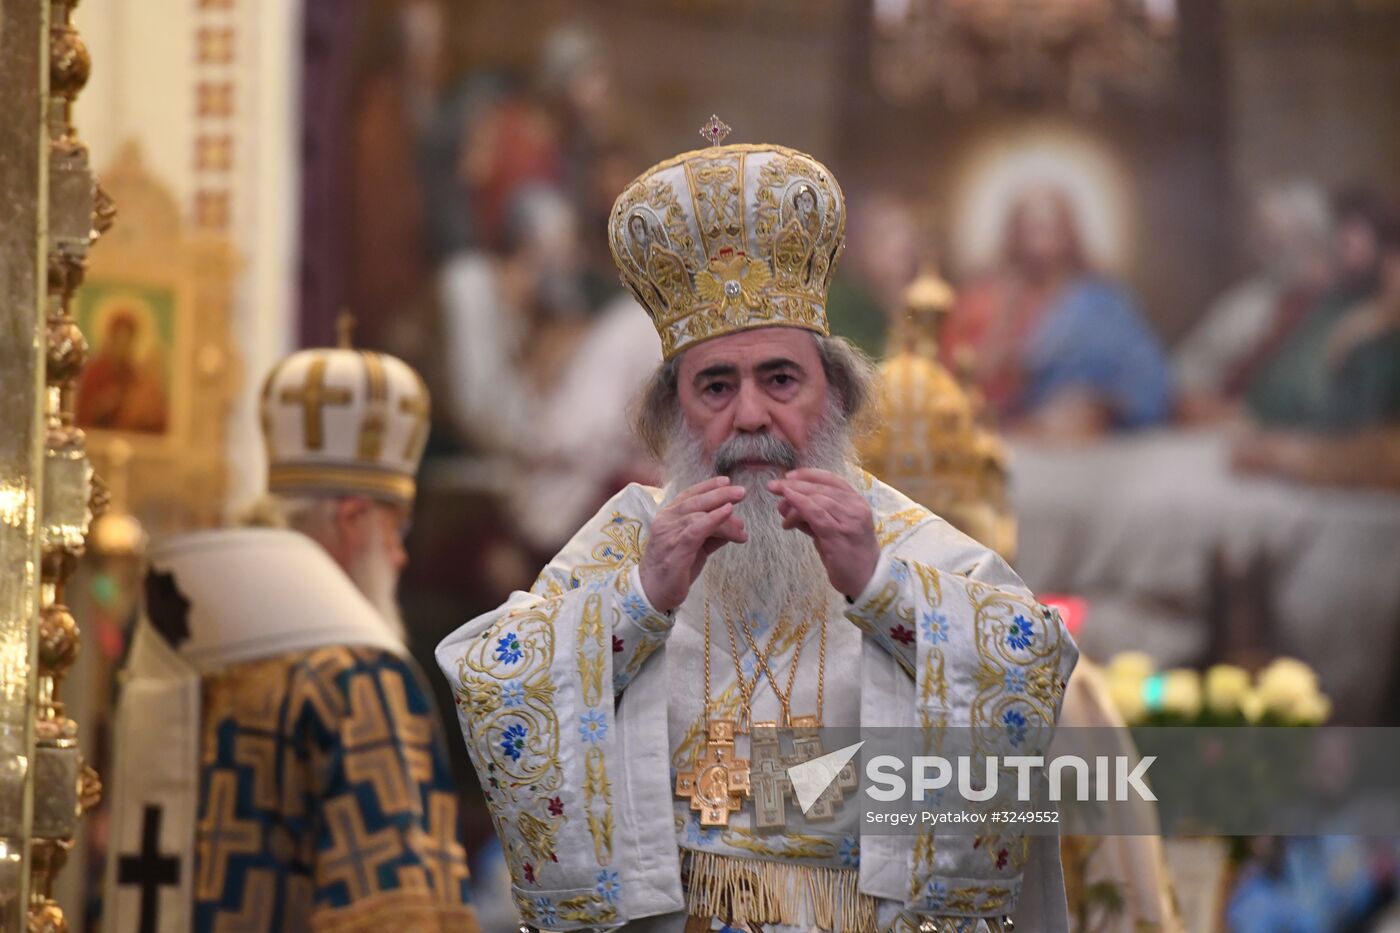 Divine Liturgy in Cathedral of Christ the Savior